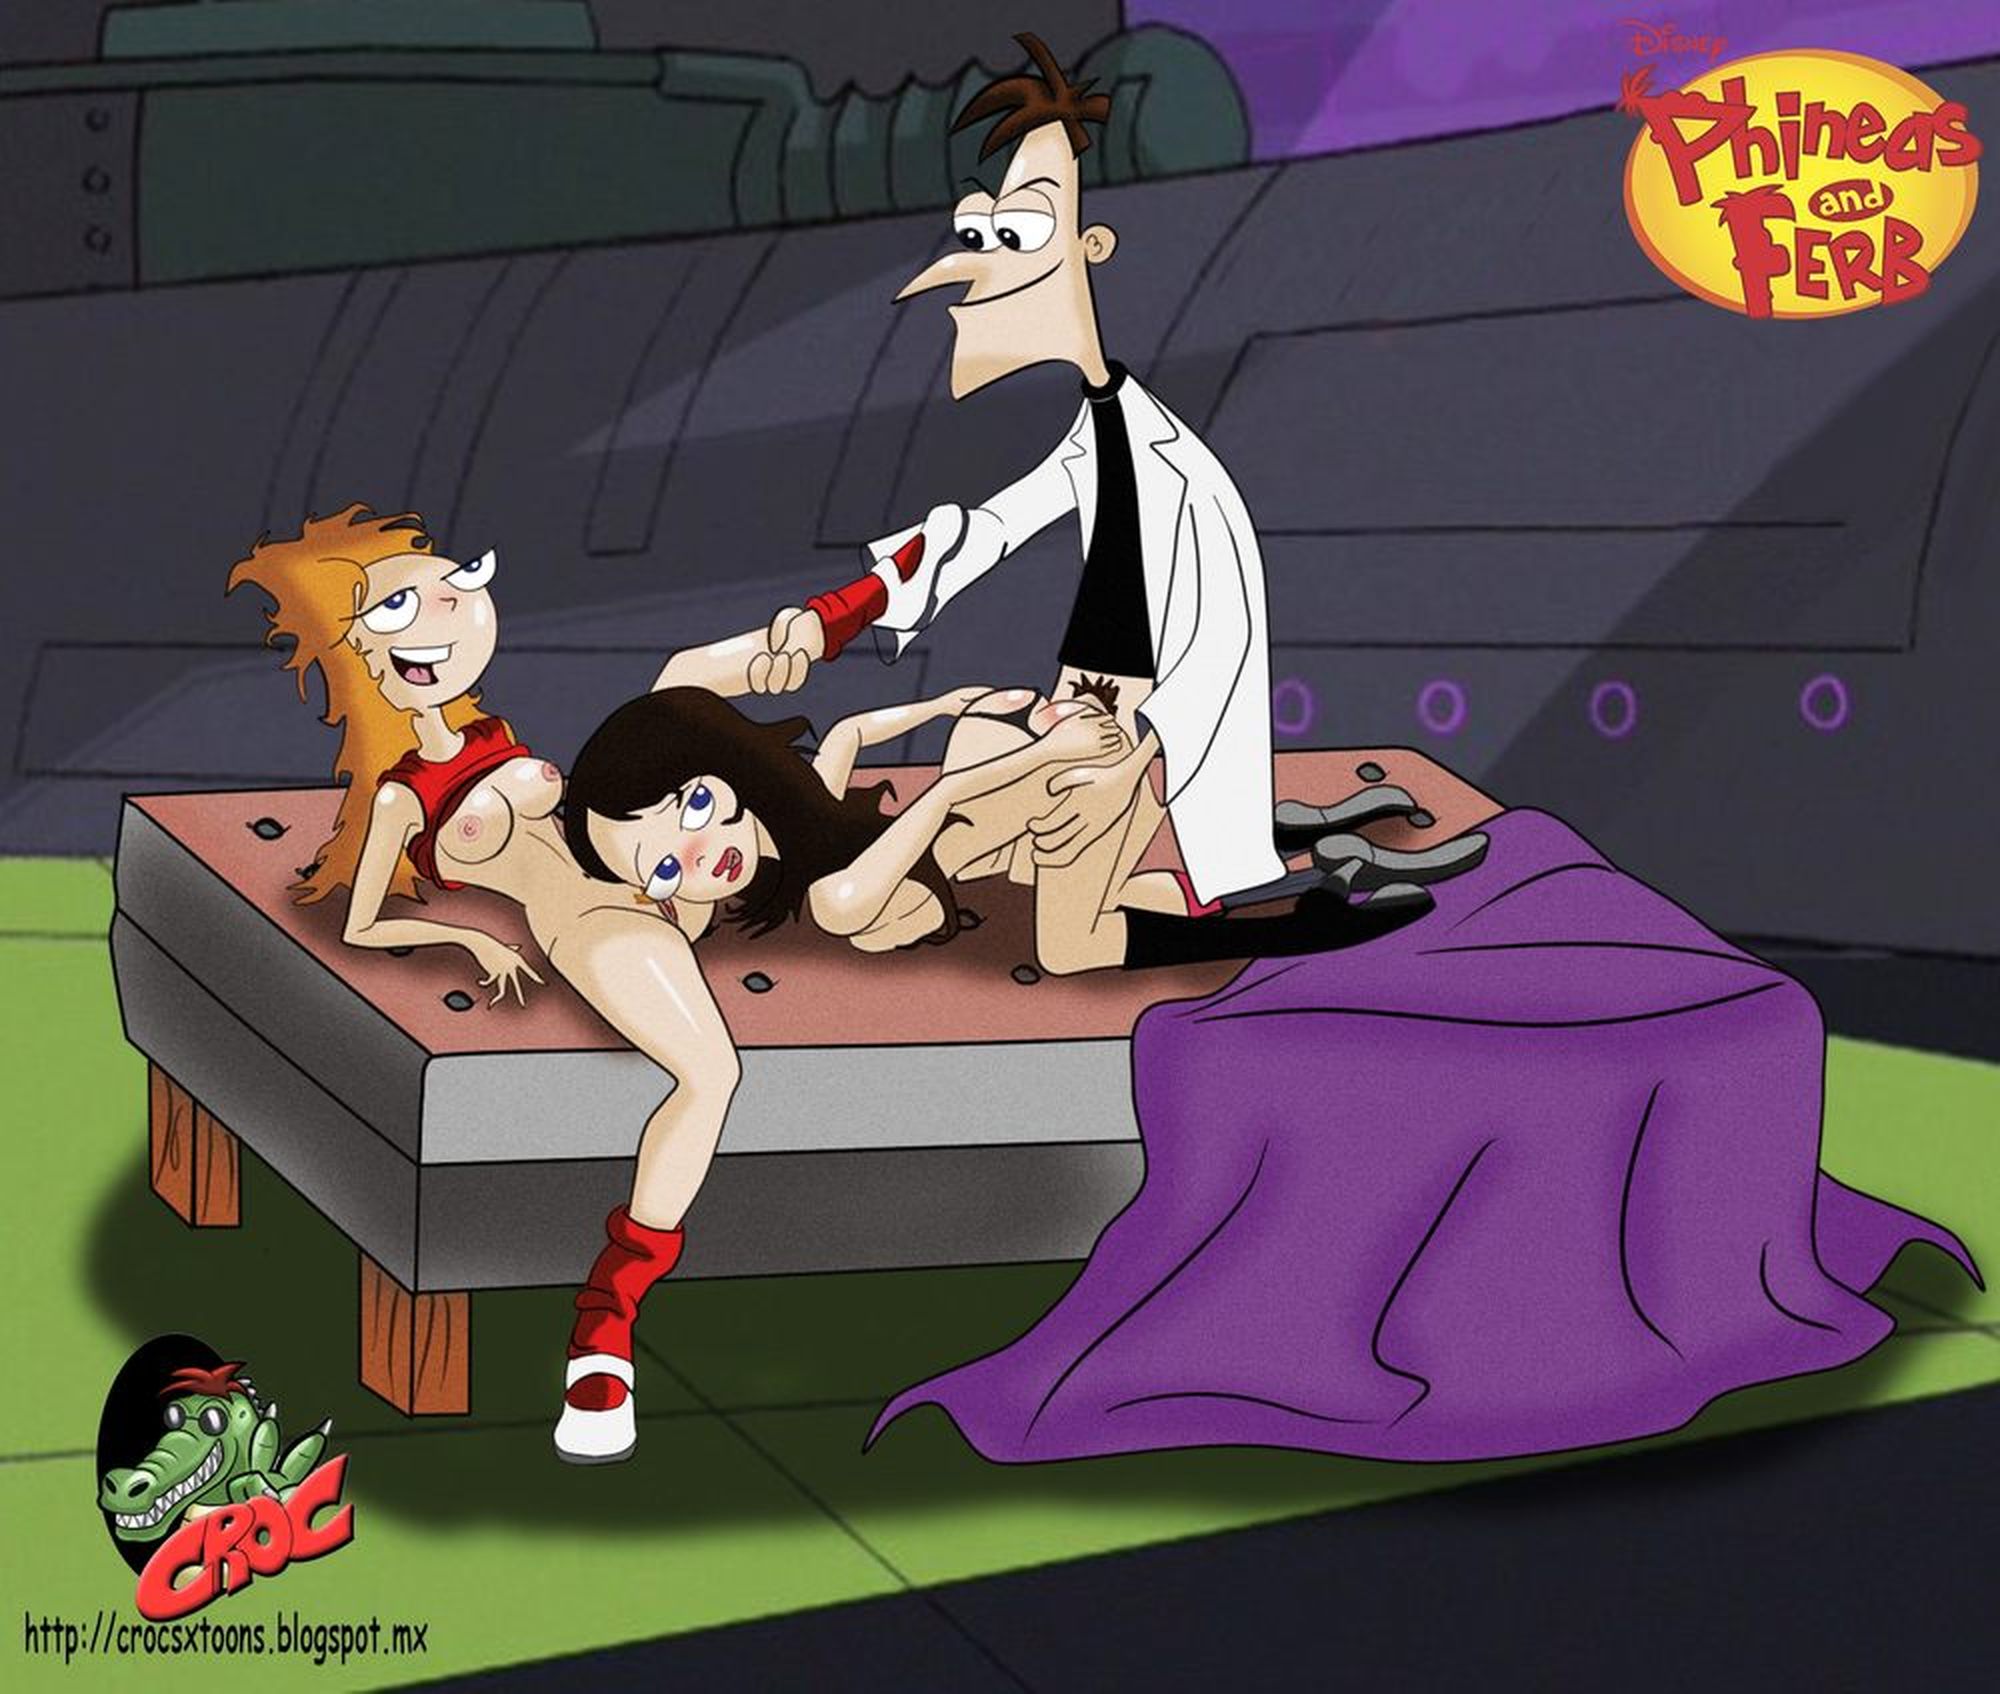 Phineas and ferb vanessa porn comics - milly marks